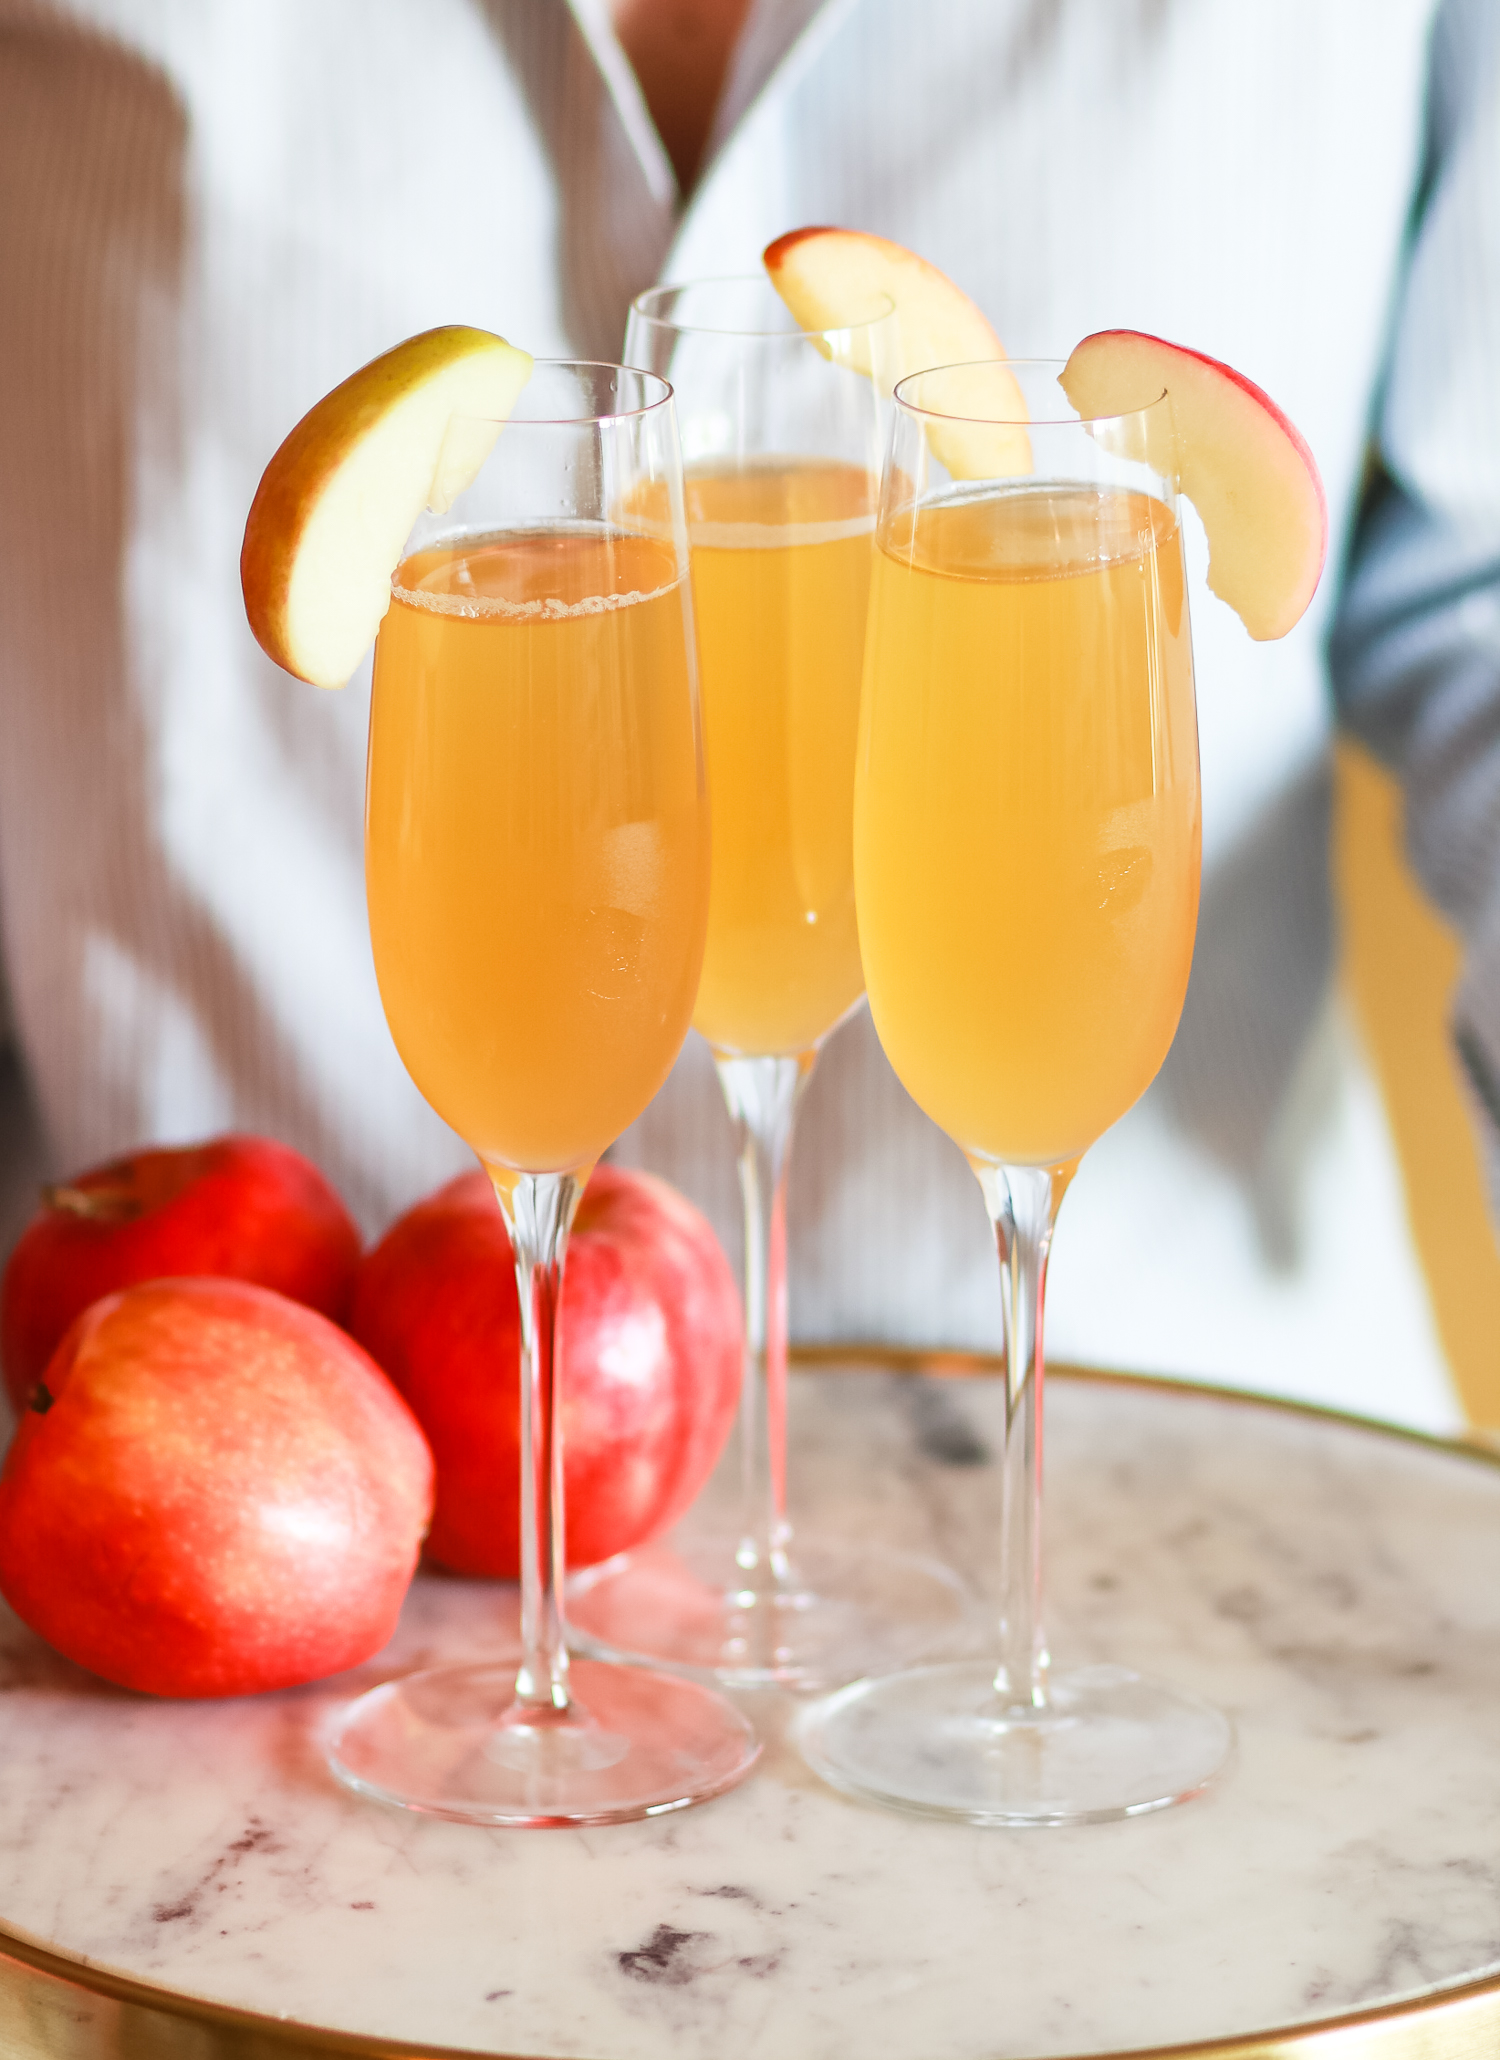 Seriously delish apple cider bellinis... such a fun fall champagne cocktail | Apple Cider Cocktail | Fall in a Flute: Festive Apple Cider Bellinis from southern blogger Stephanie Ziajka from Diary of a Debutante